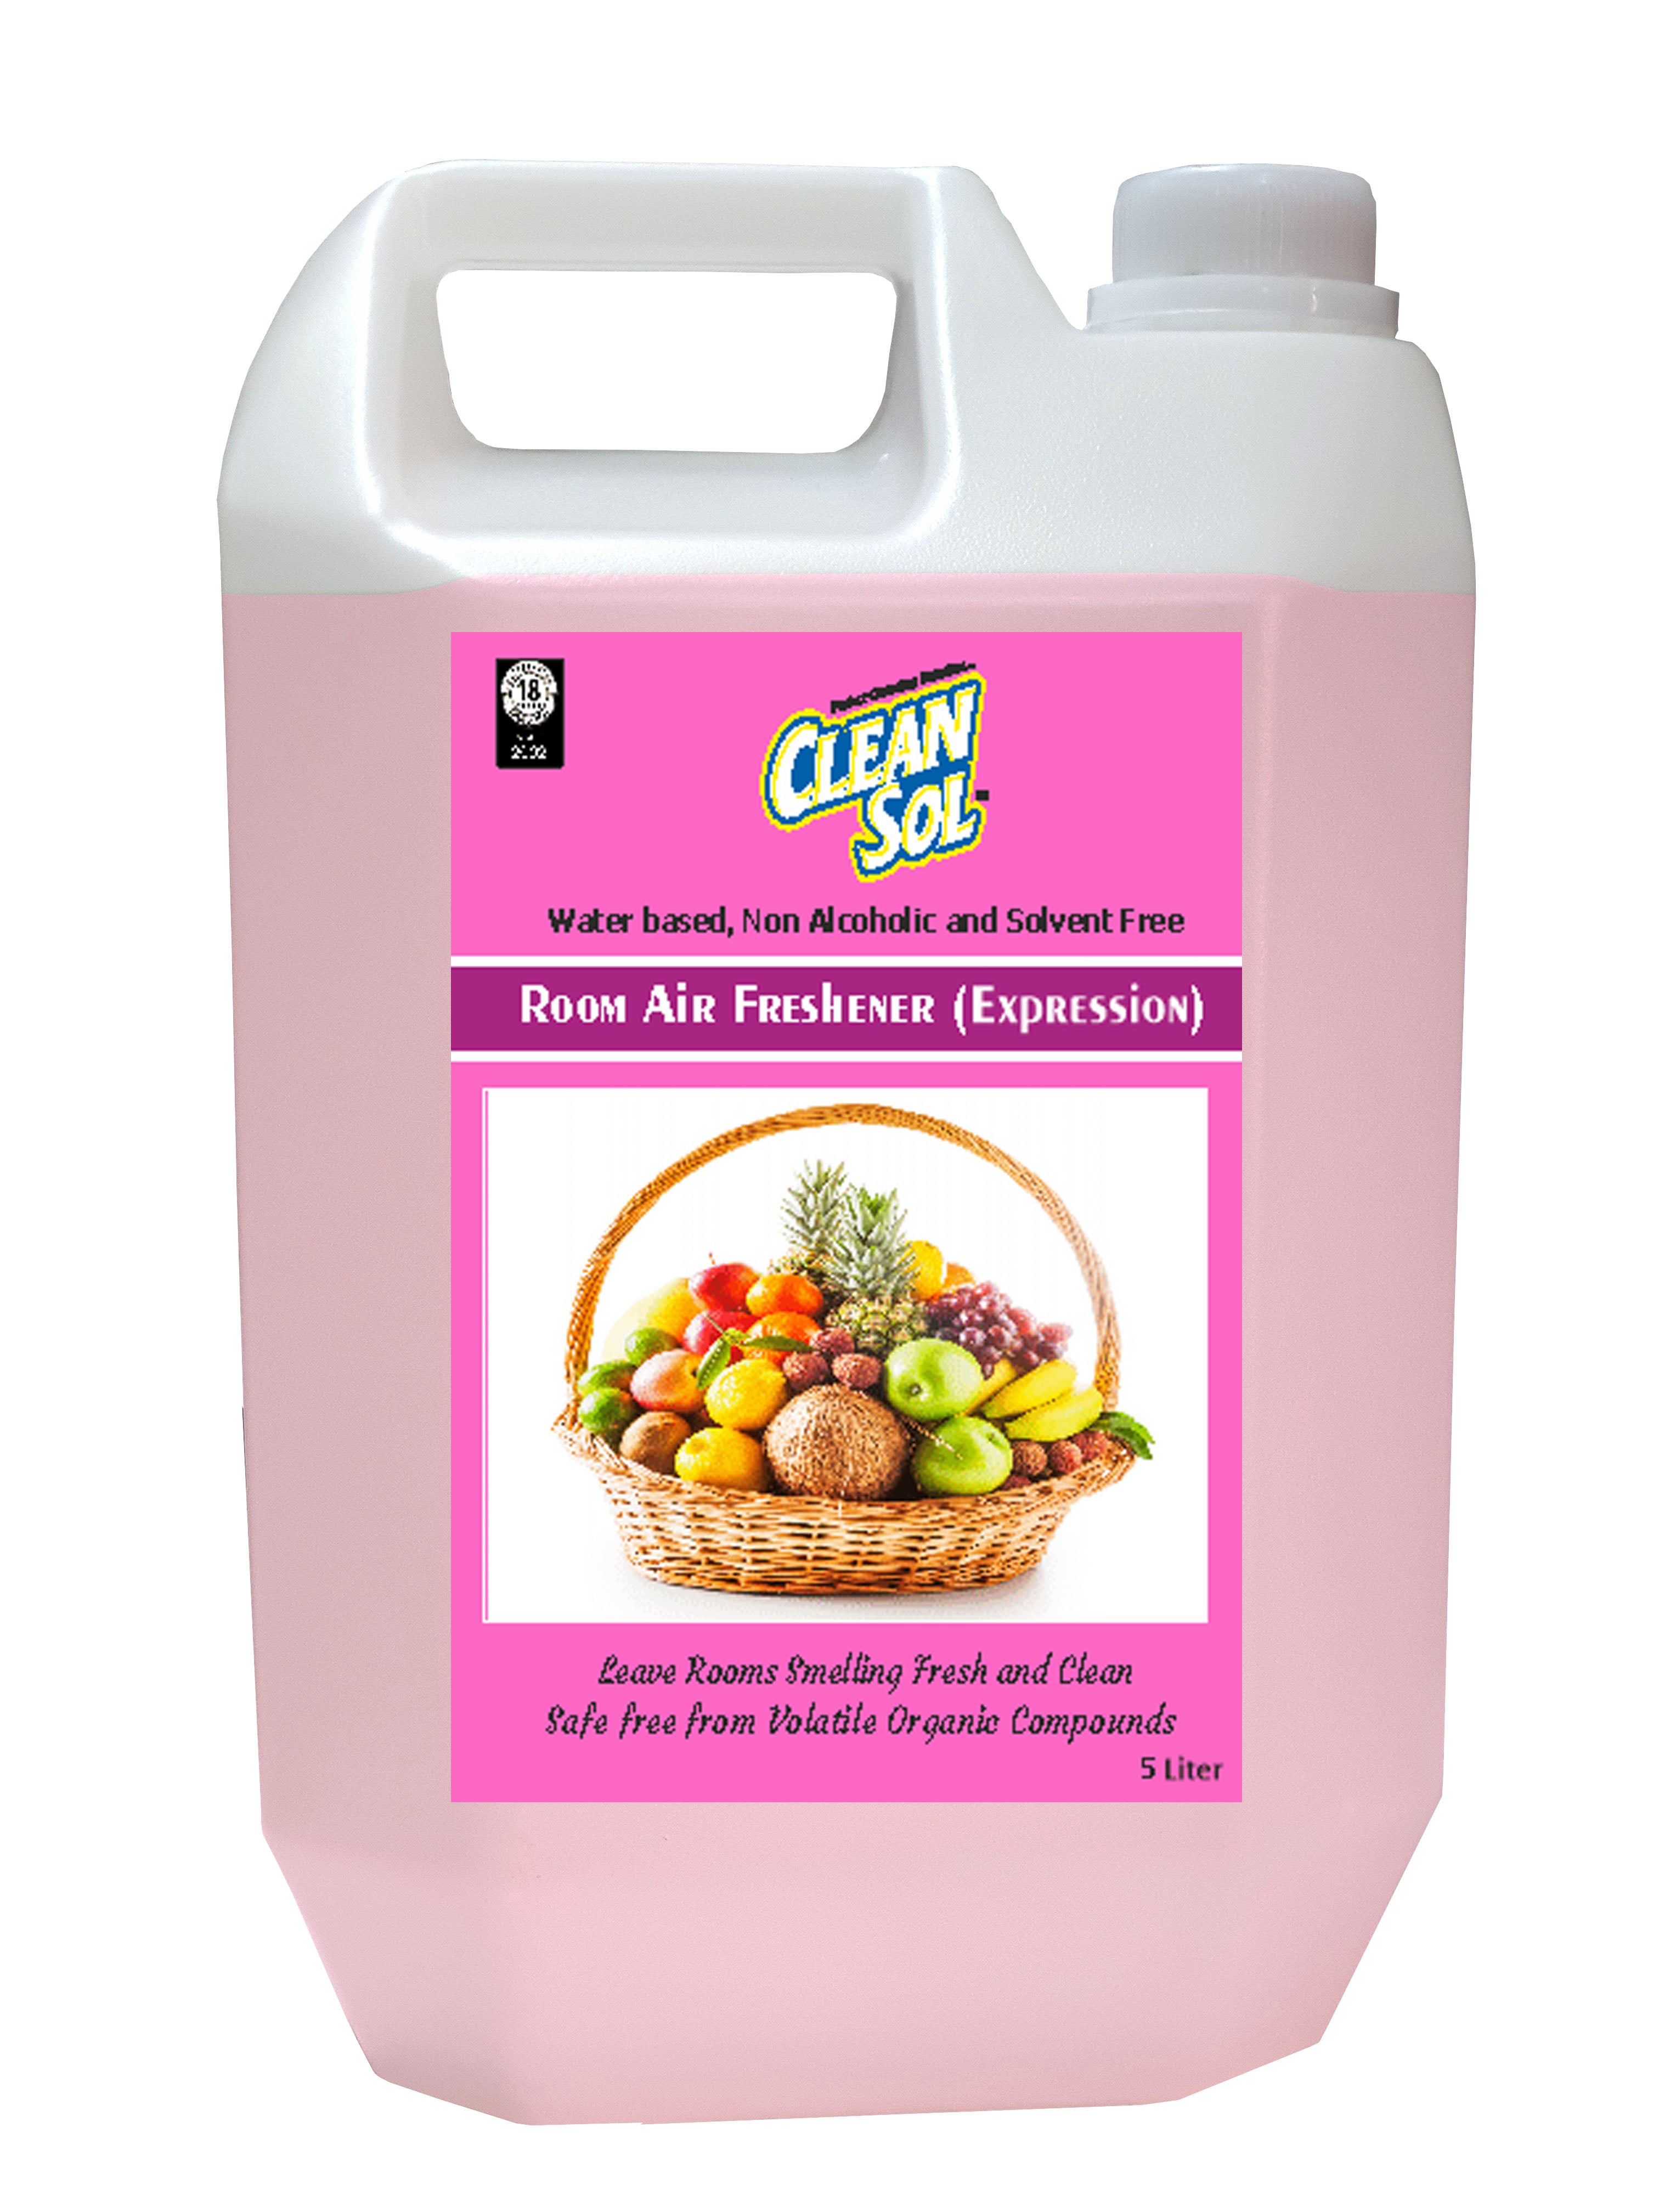 Cleansol Water based Room Air Freshener - Alcohol Free 5 Ltr